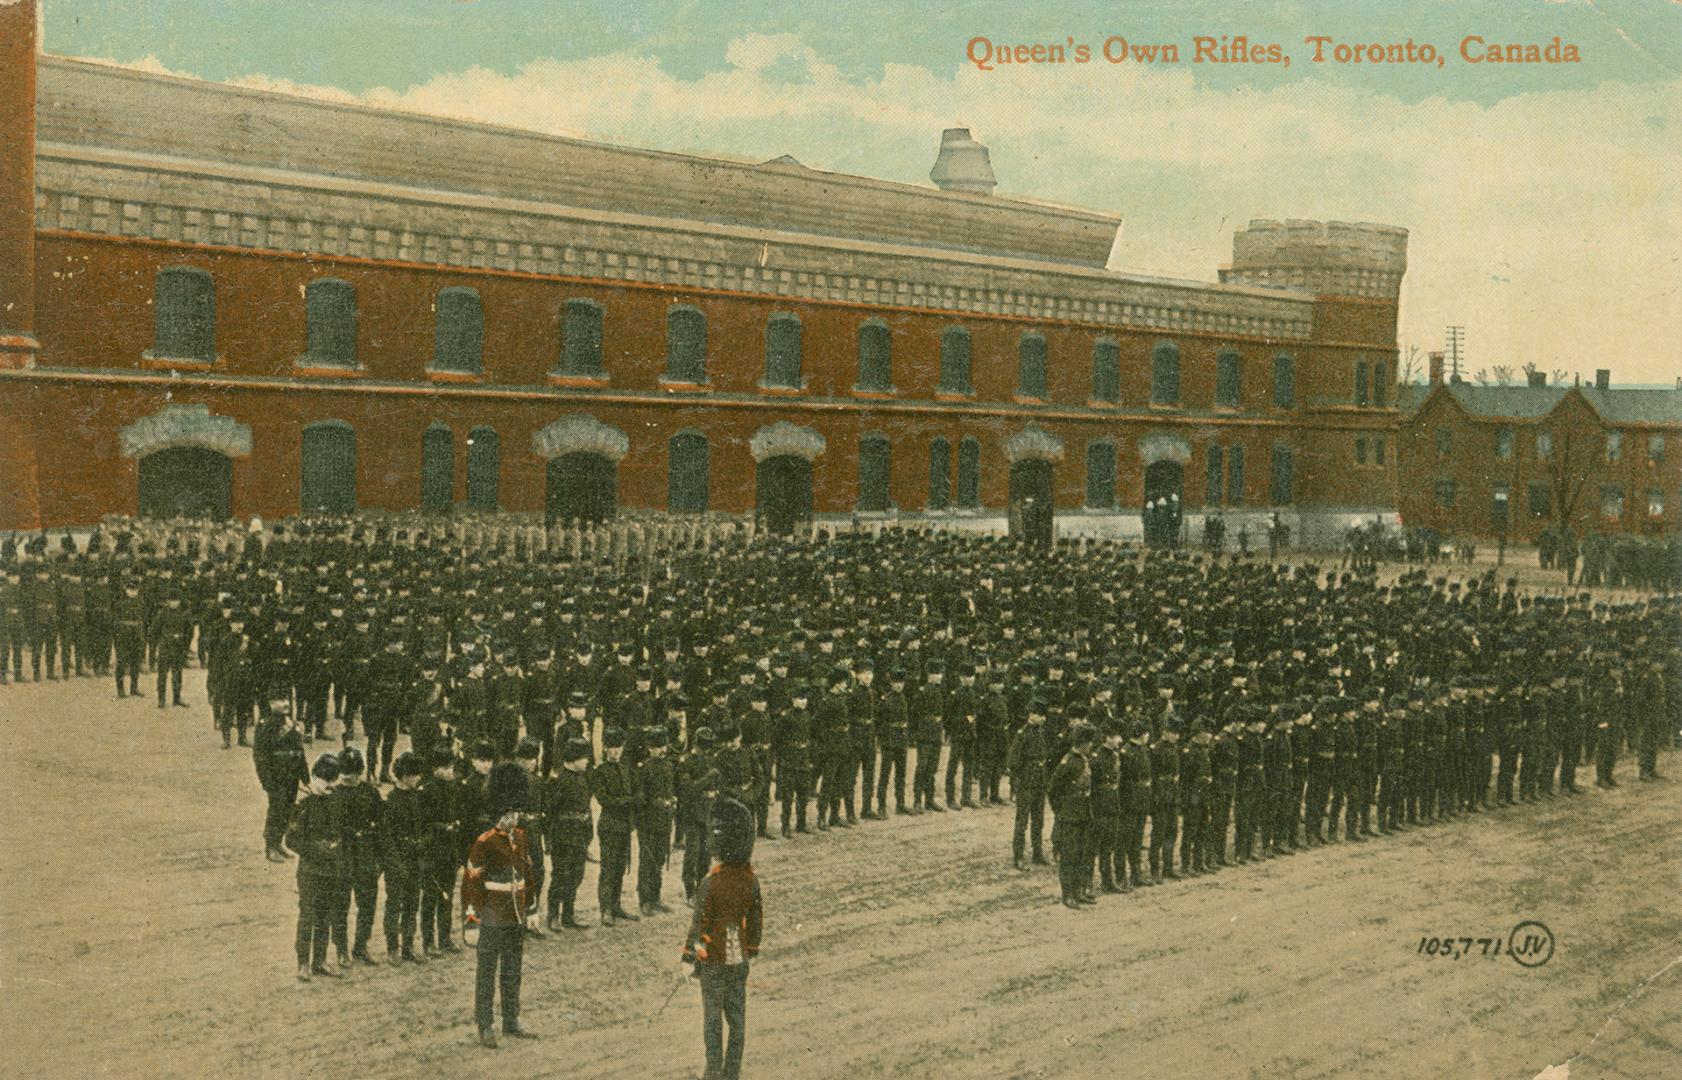 Colorized photograph of a large group of soldiers mustered in front of a large castle-like buil ...